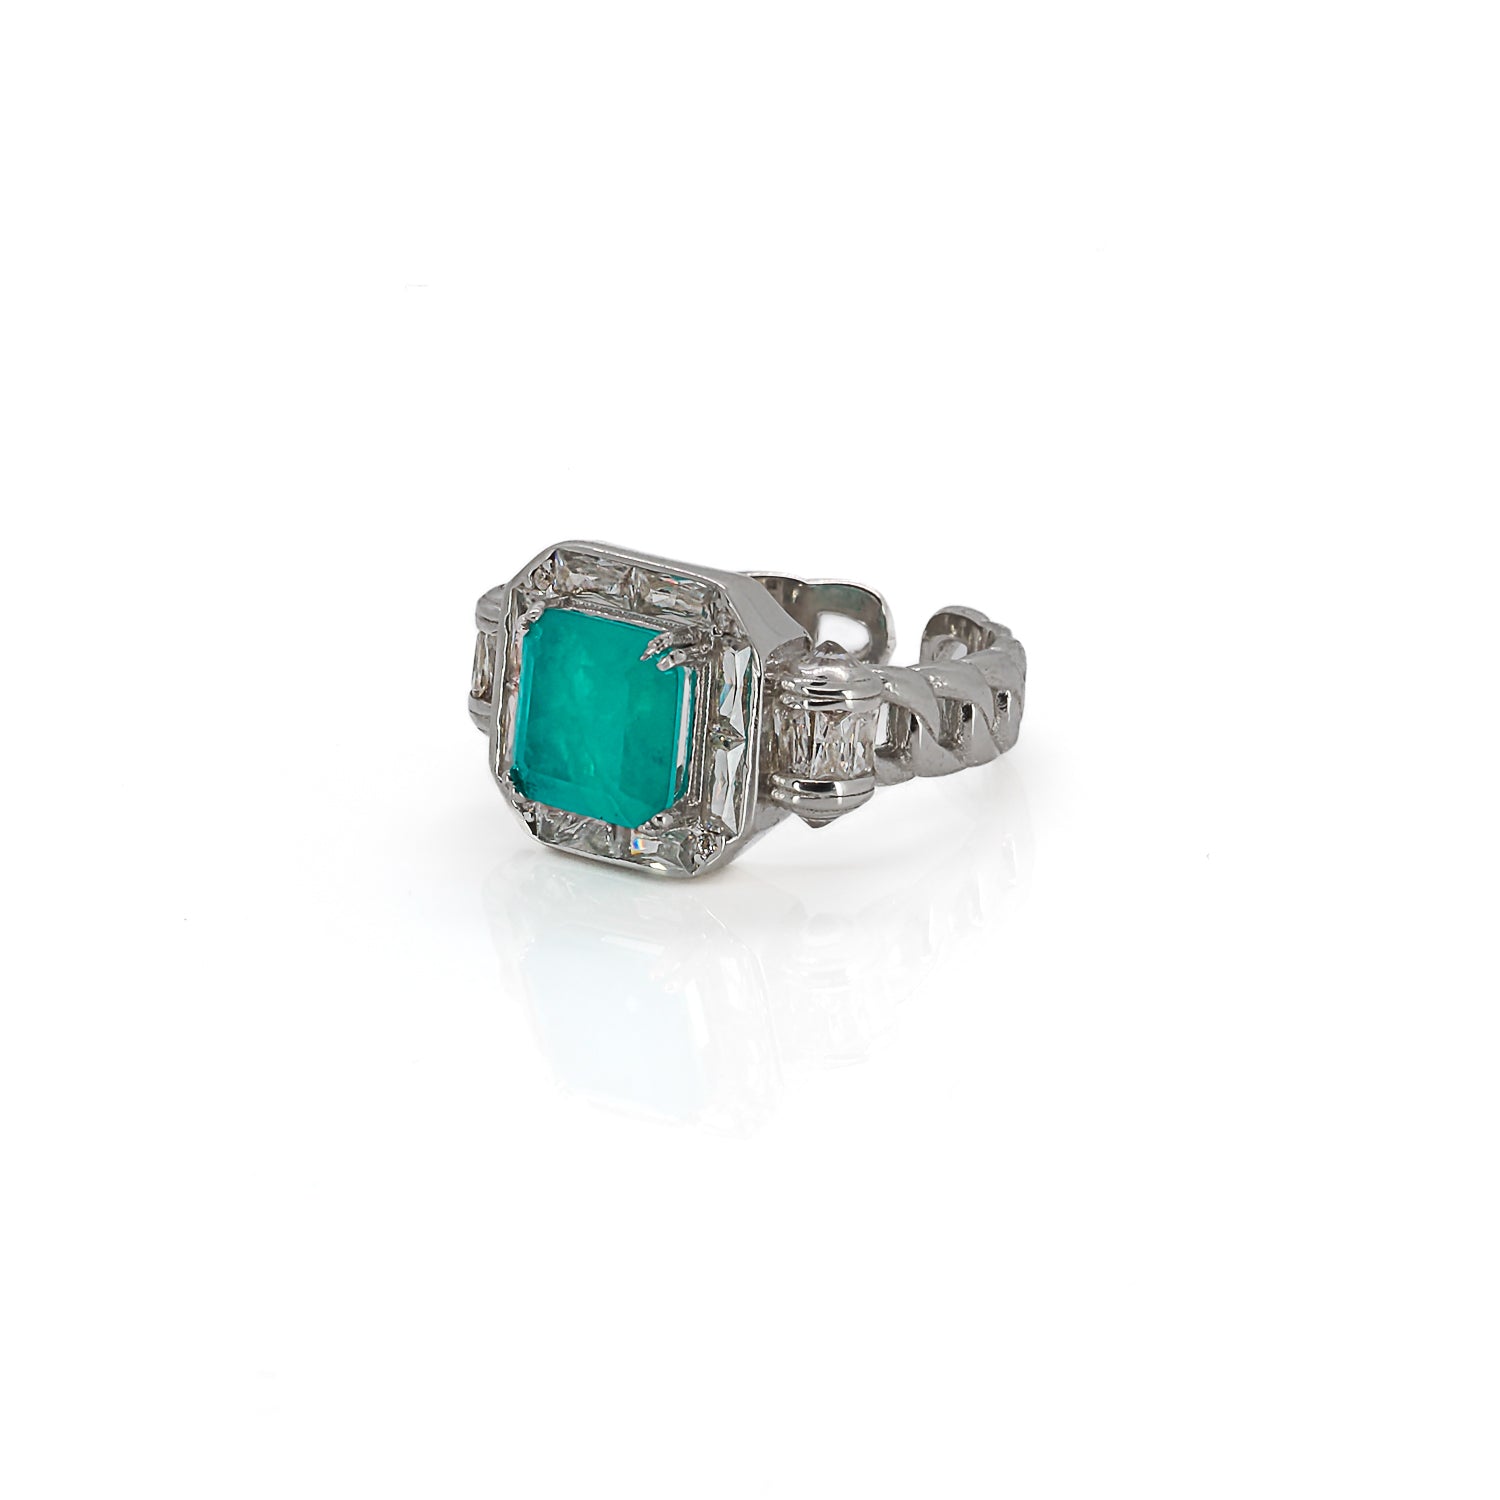 Handmade Sterling Silver Ring with Gemstones - Refined Opulence